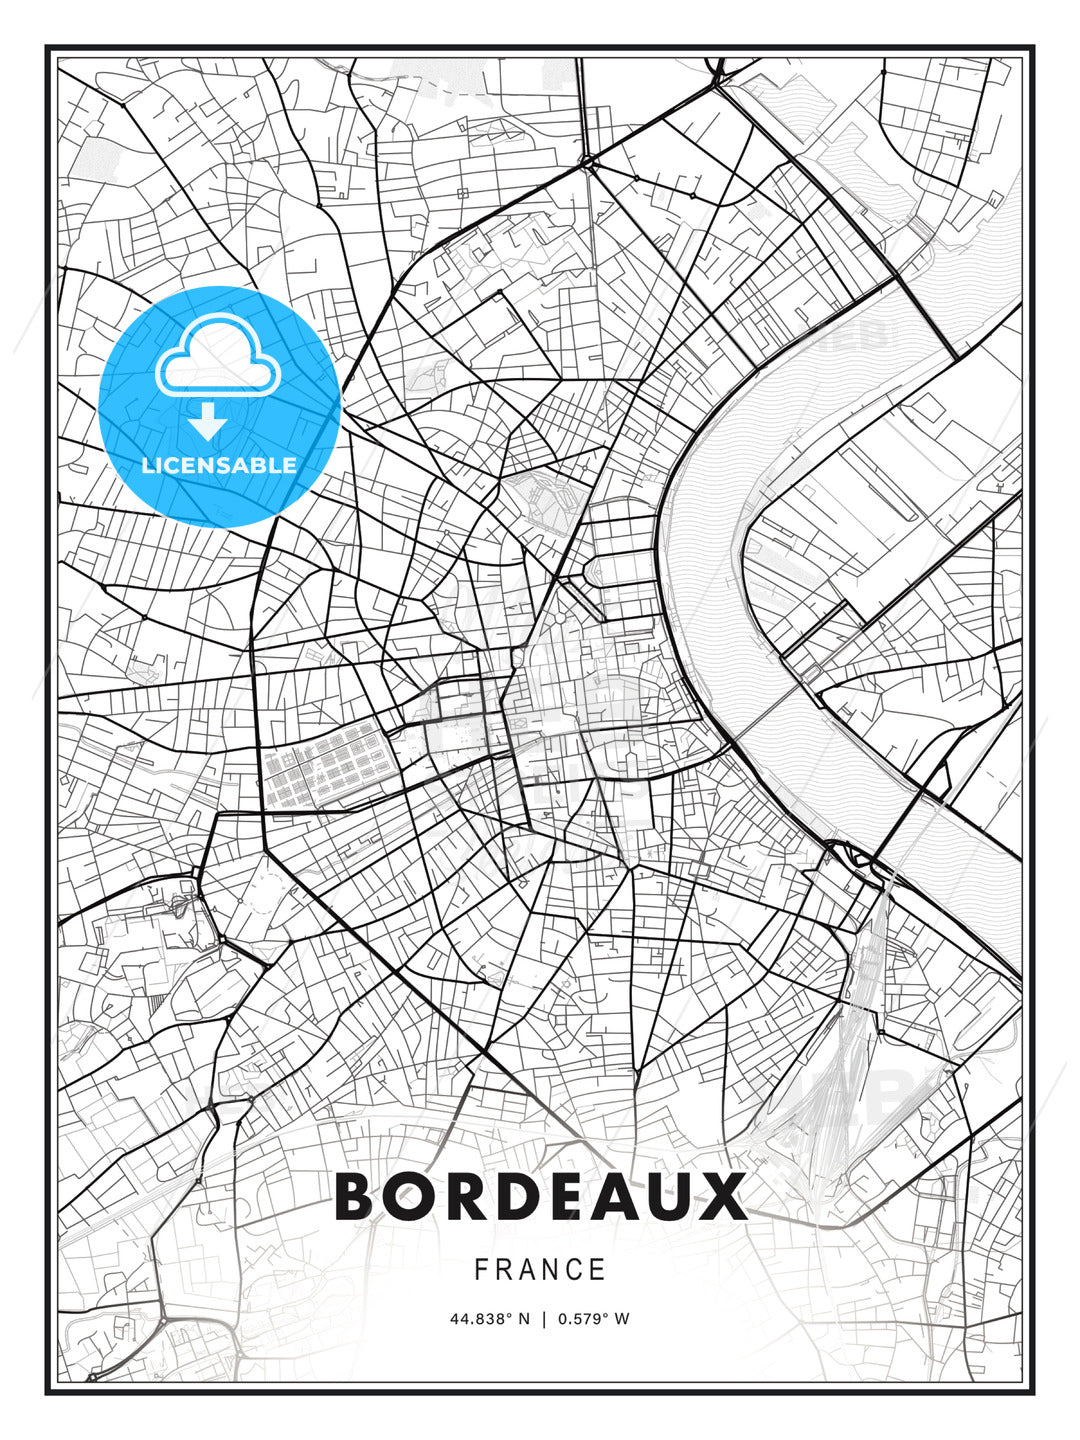 Bordeaux, France, Modern Print Template in Various Formats - HEBSTREITS Sketches